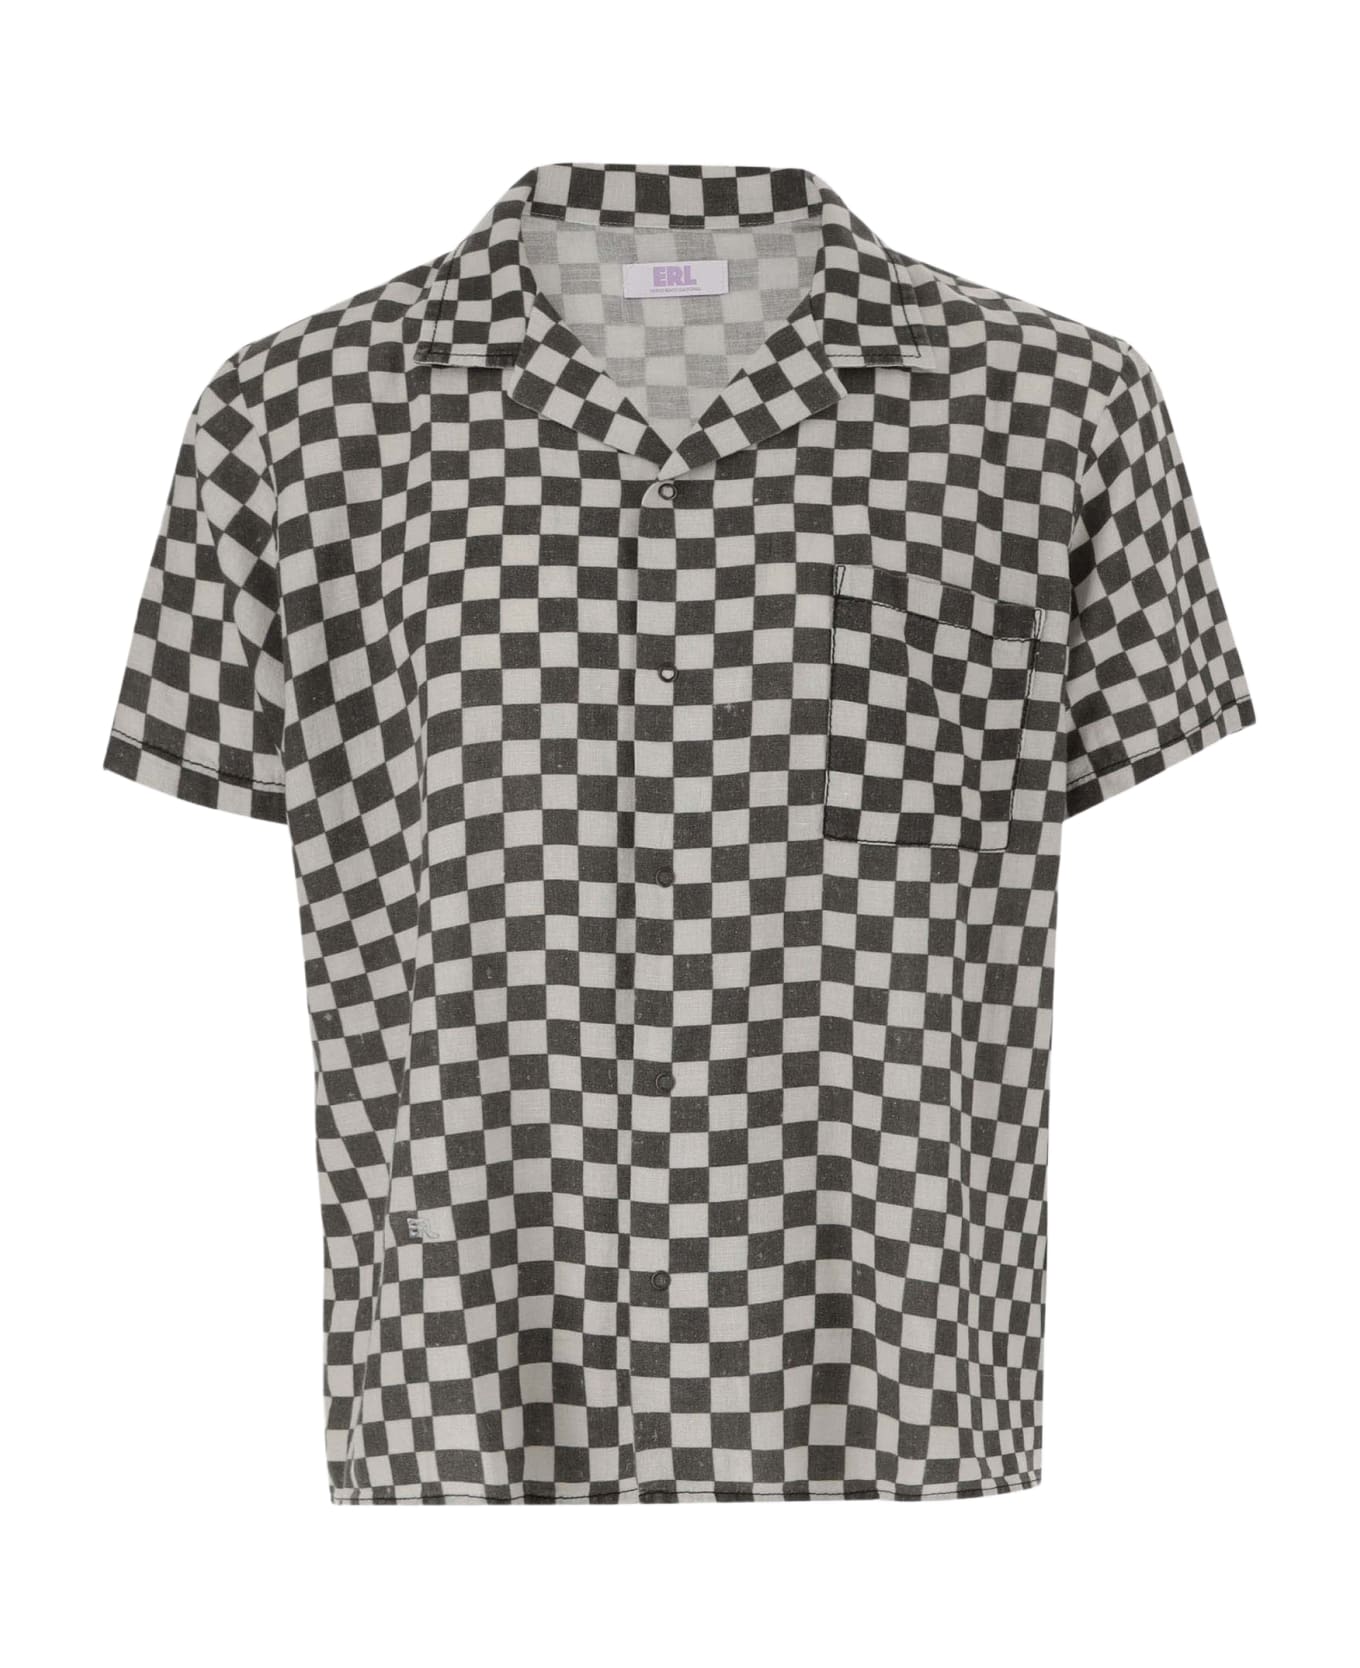 ERL Cotton And Linen Shirt With Checkered Pattern - Red